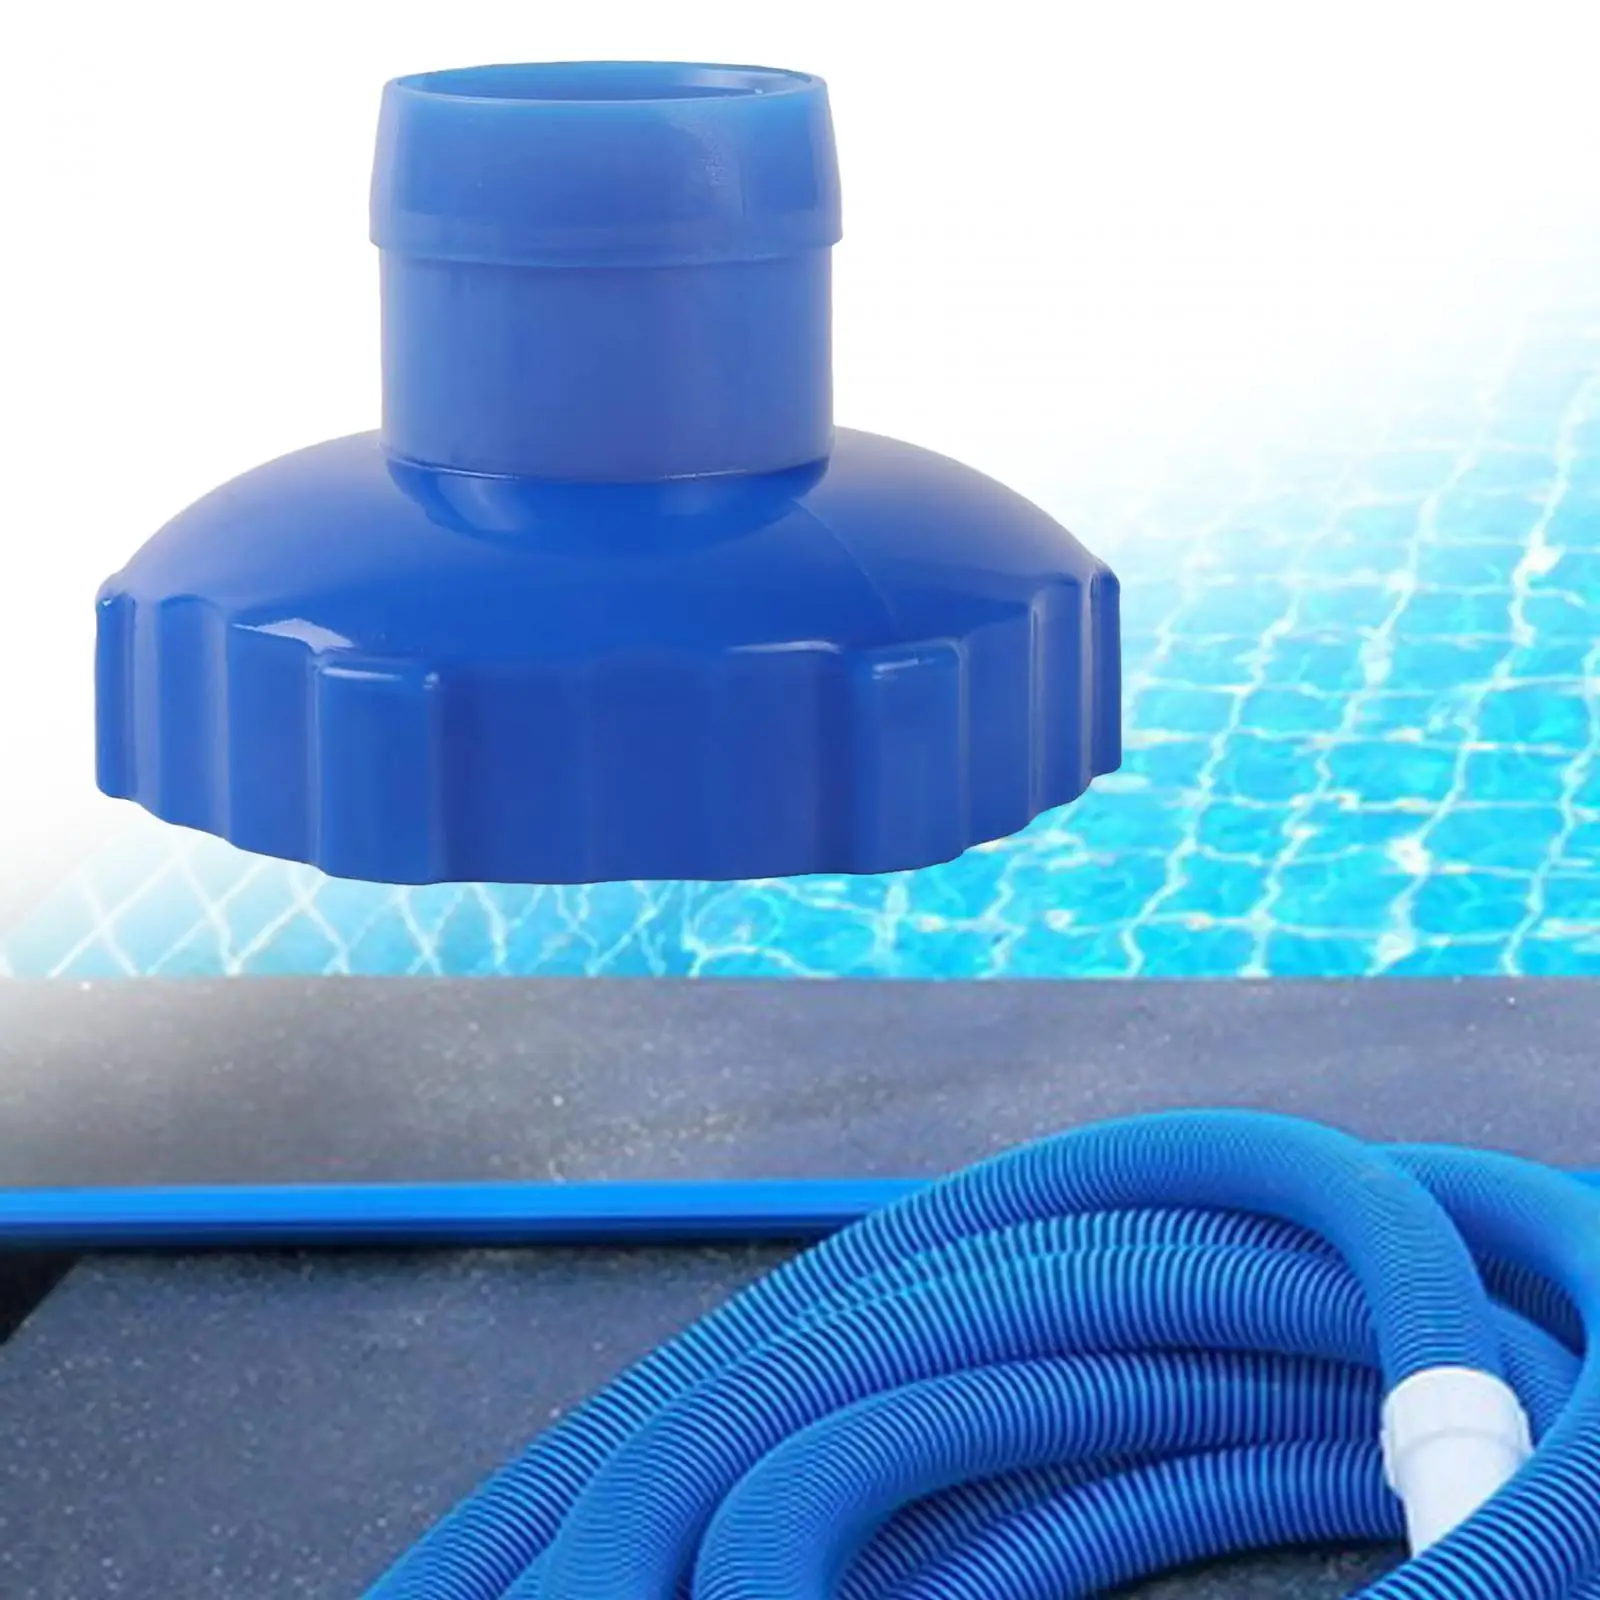 Pool Vacuum Hose Adapter Pool Skimmer Hose Adapter Replacement Hose Adapter for above Ground Swimming Pool Accs Replacement